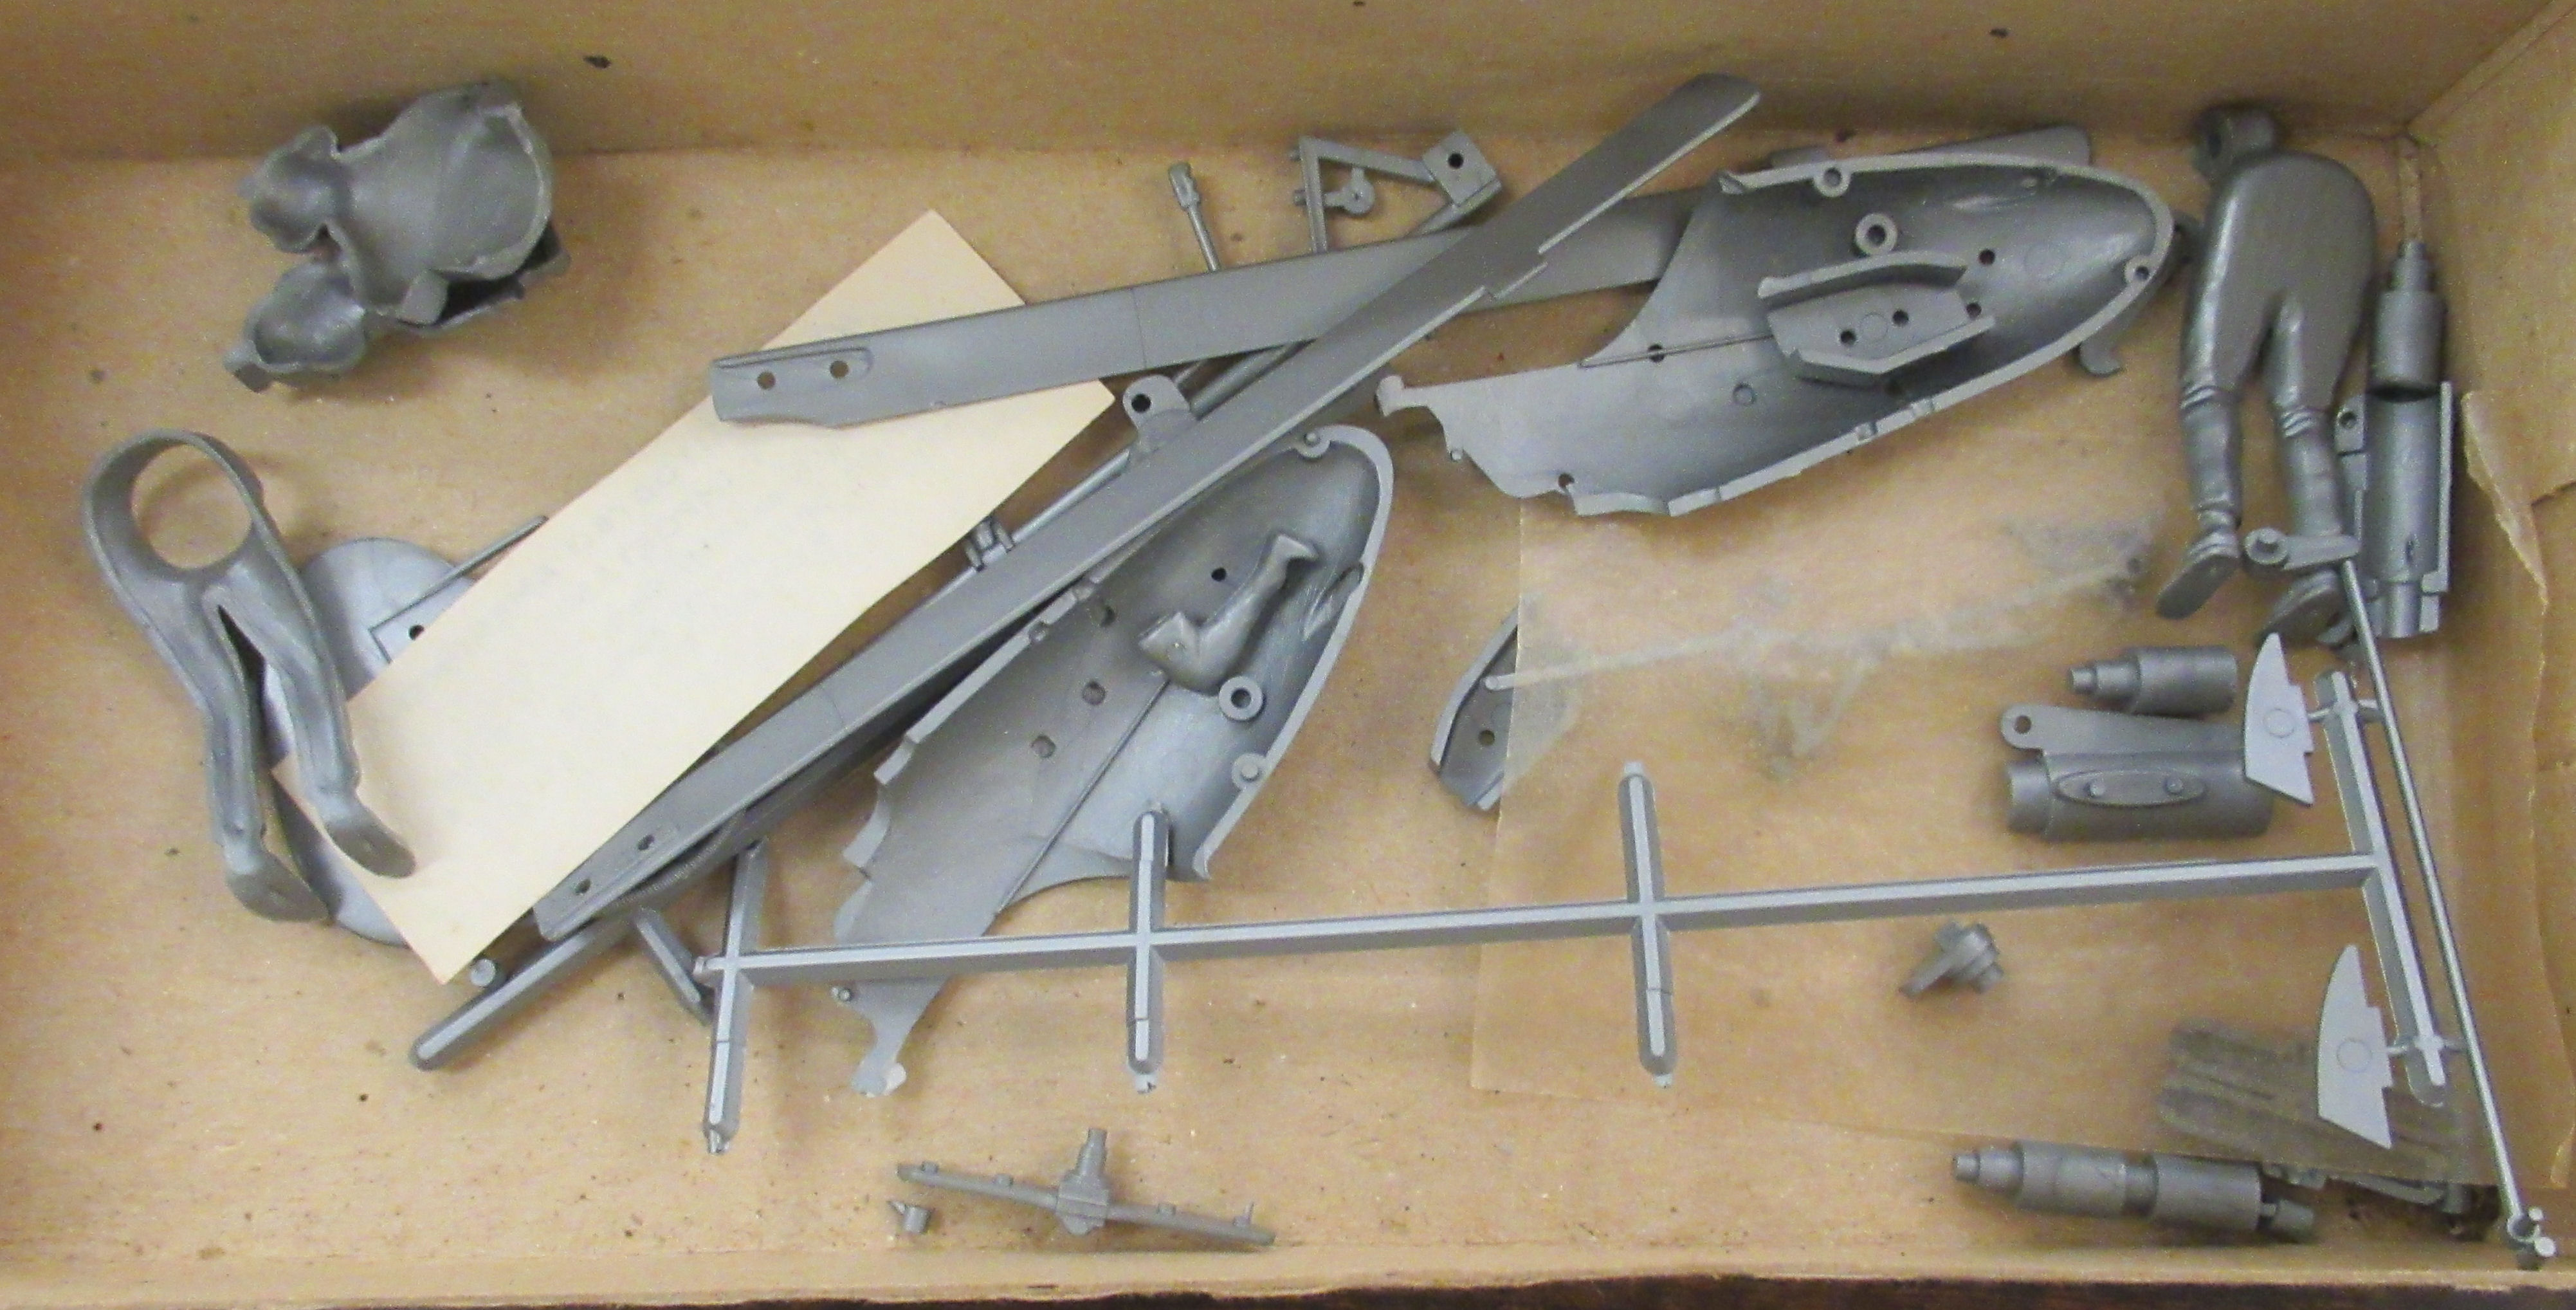 Airfix model boats, planes and trains  boxed; and other games - Image 8 of 14